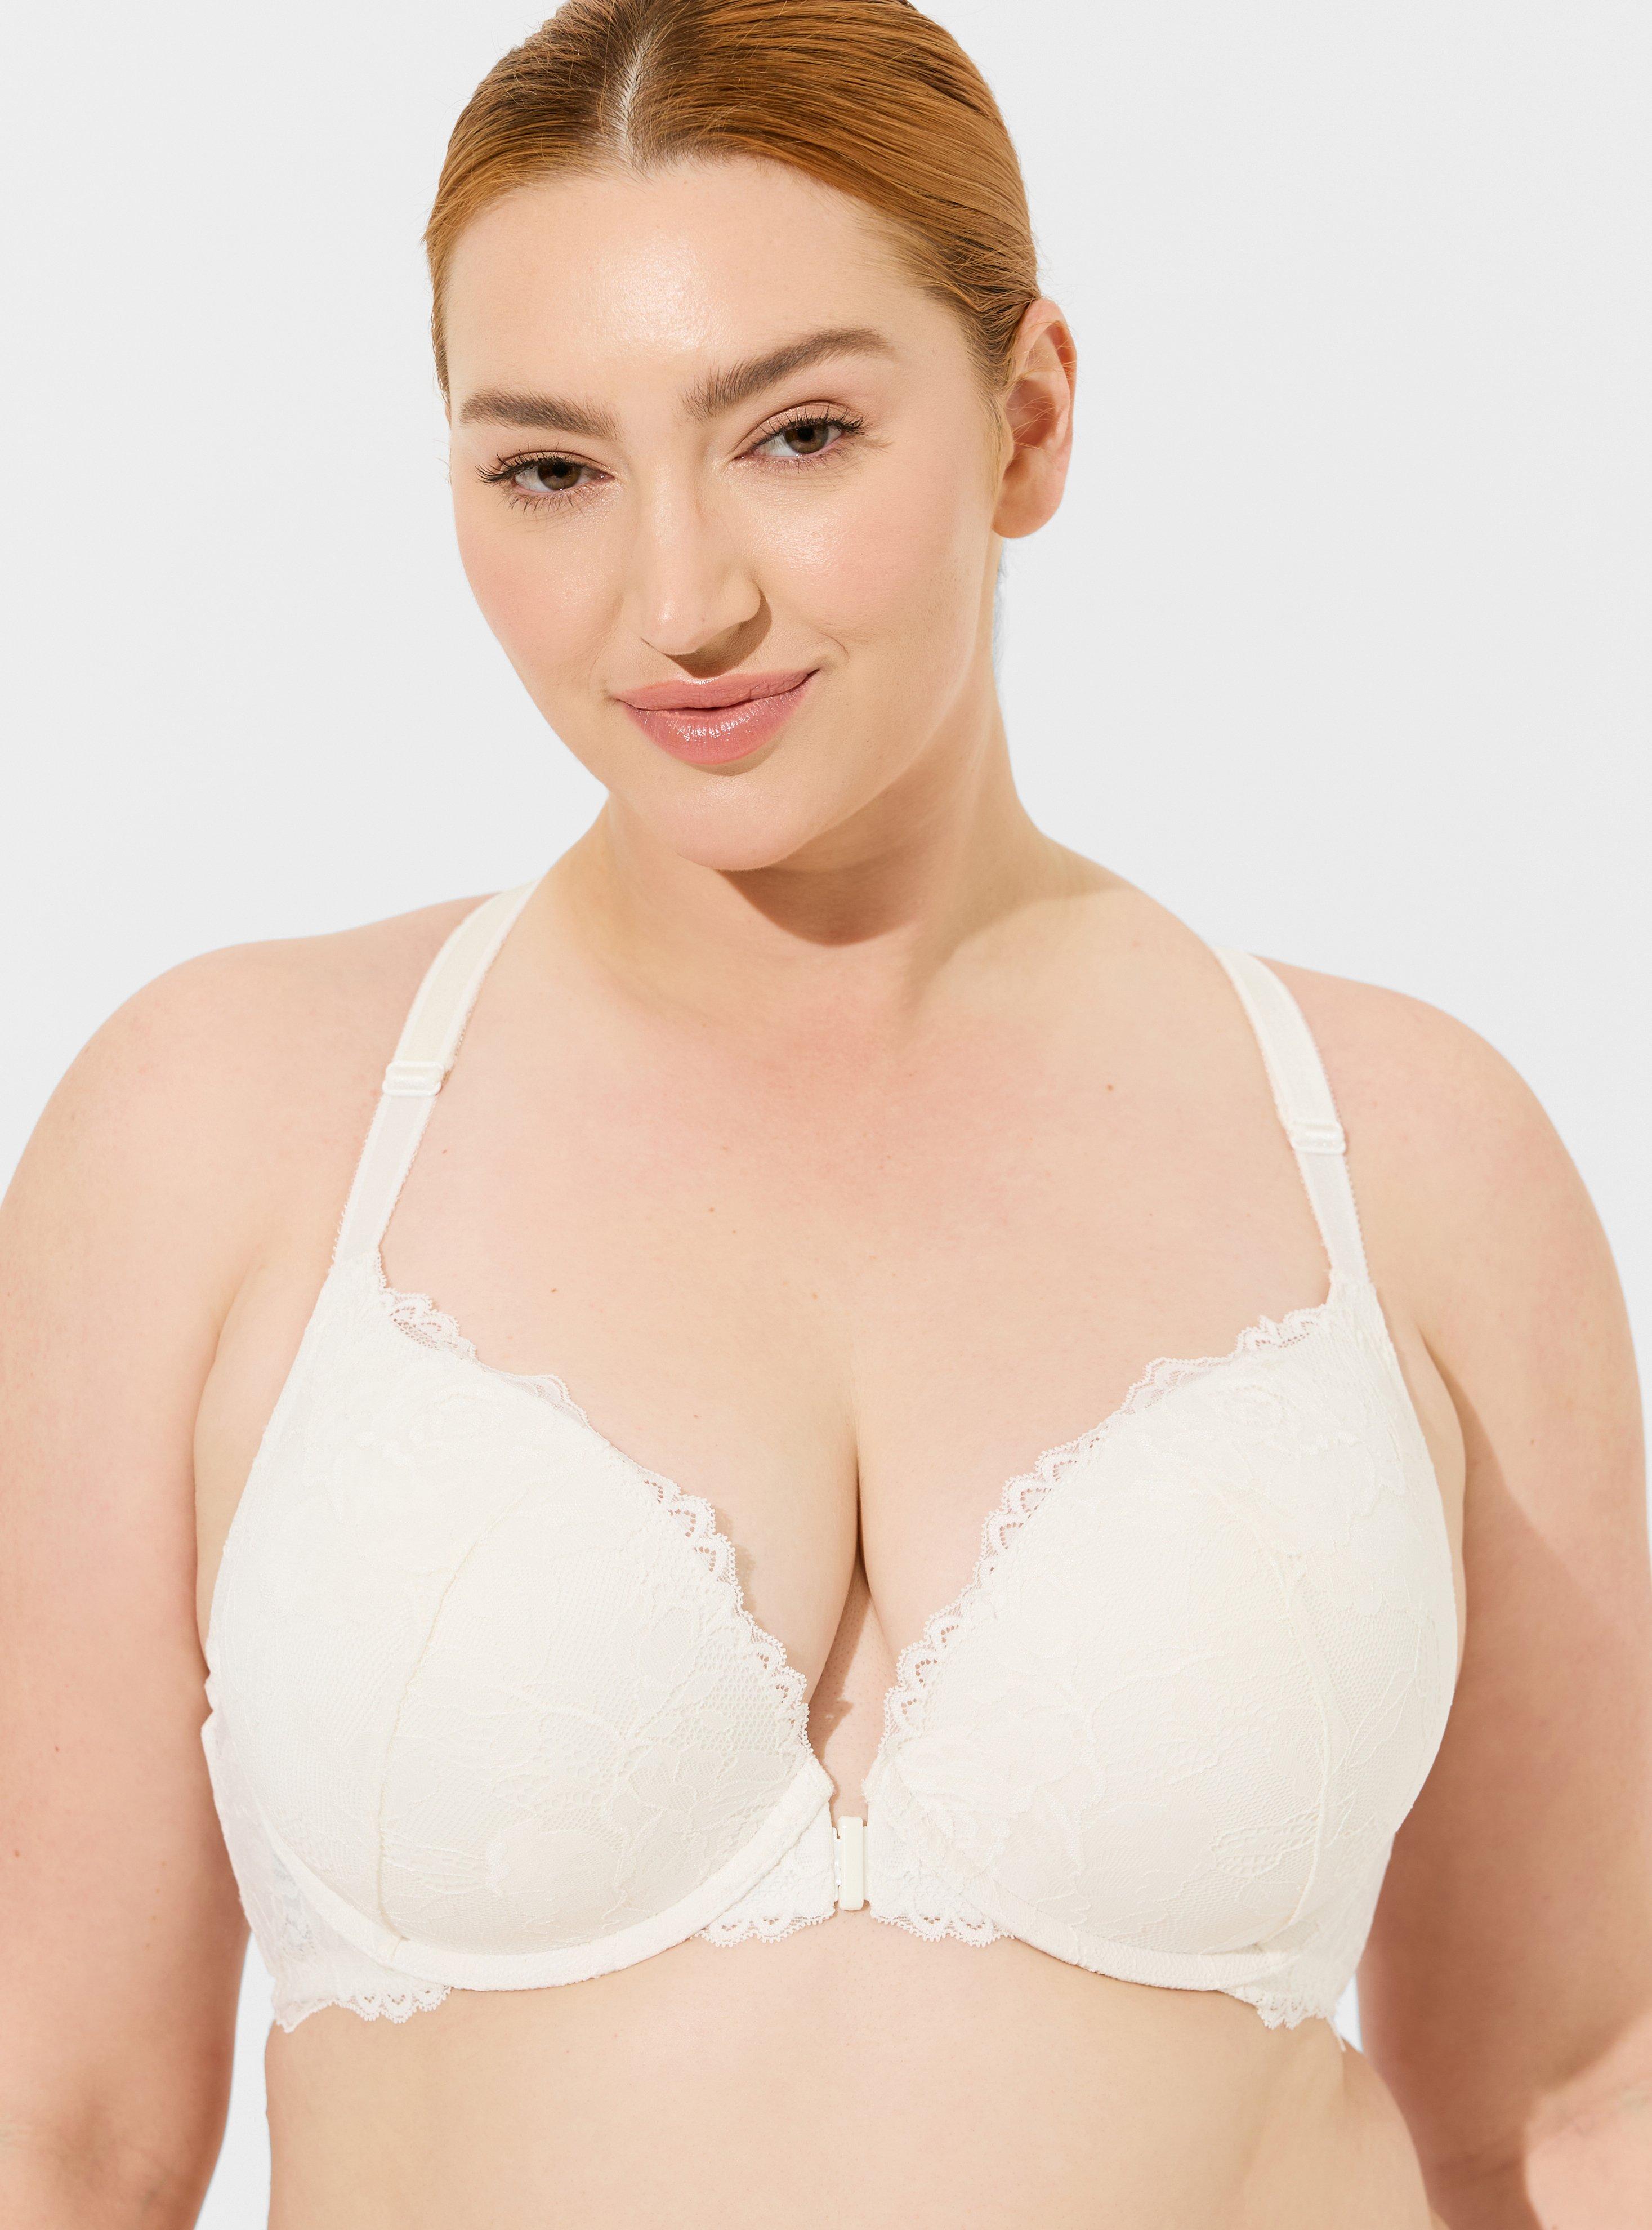 Plunge Push Up Bra with Convertible Straps for Low-Cut Outfits | Sexy Code  1701